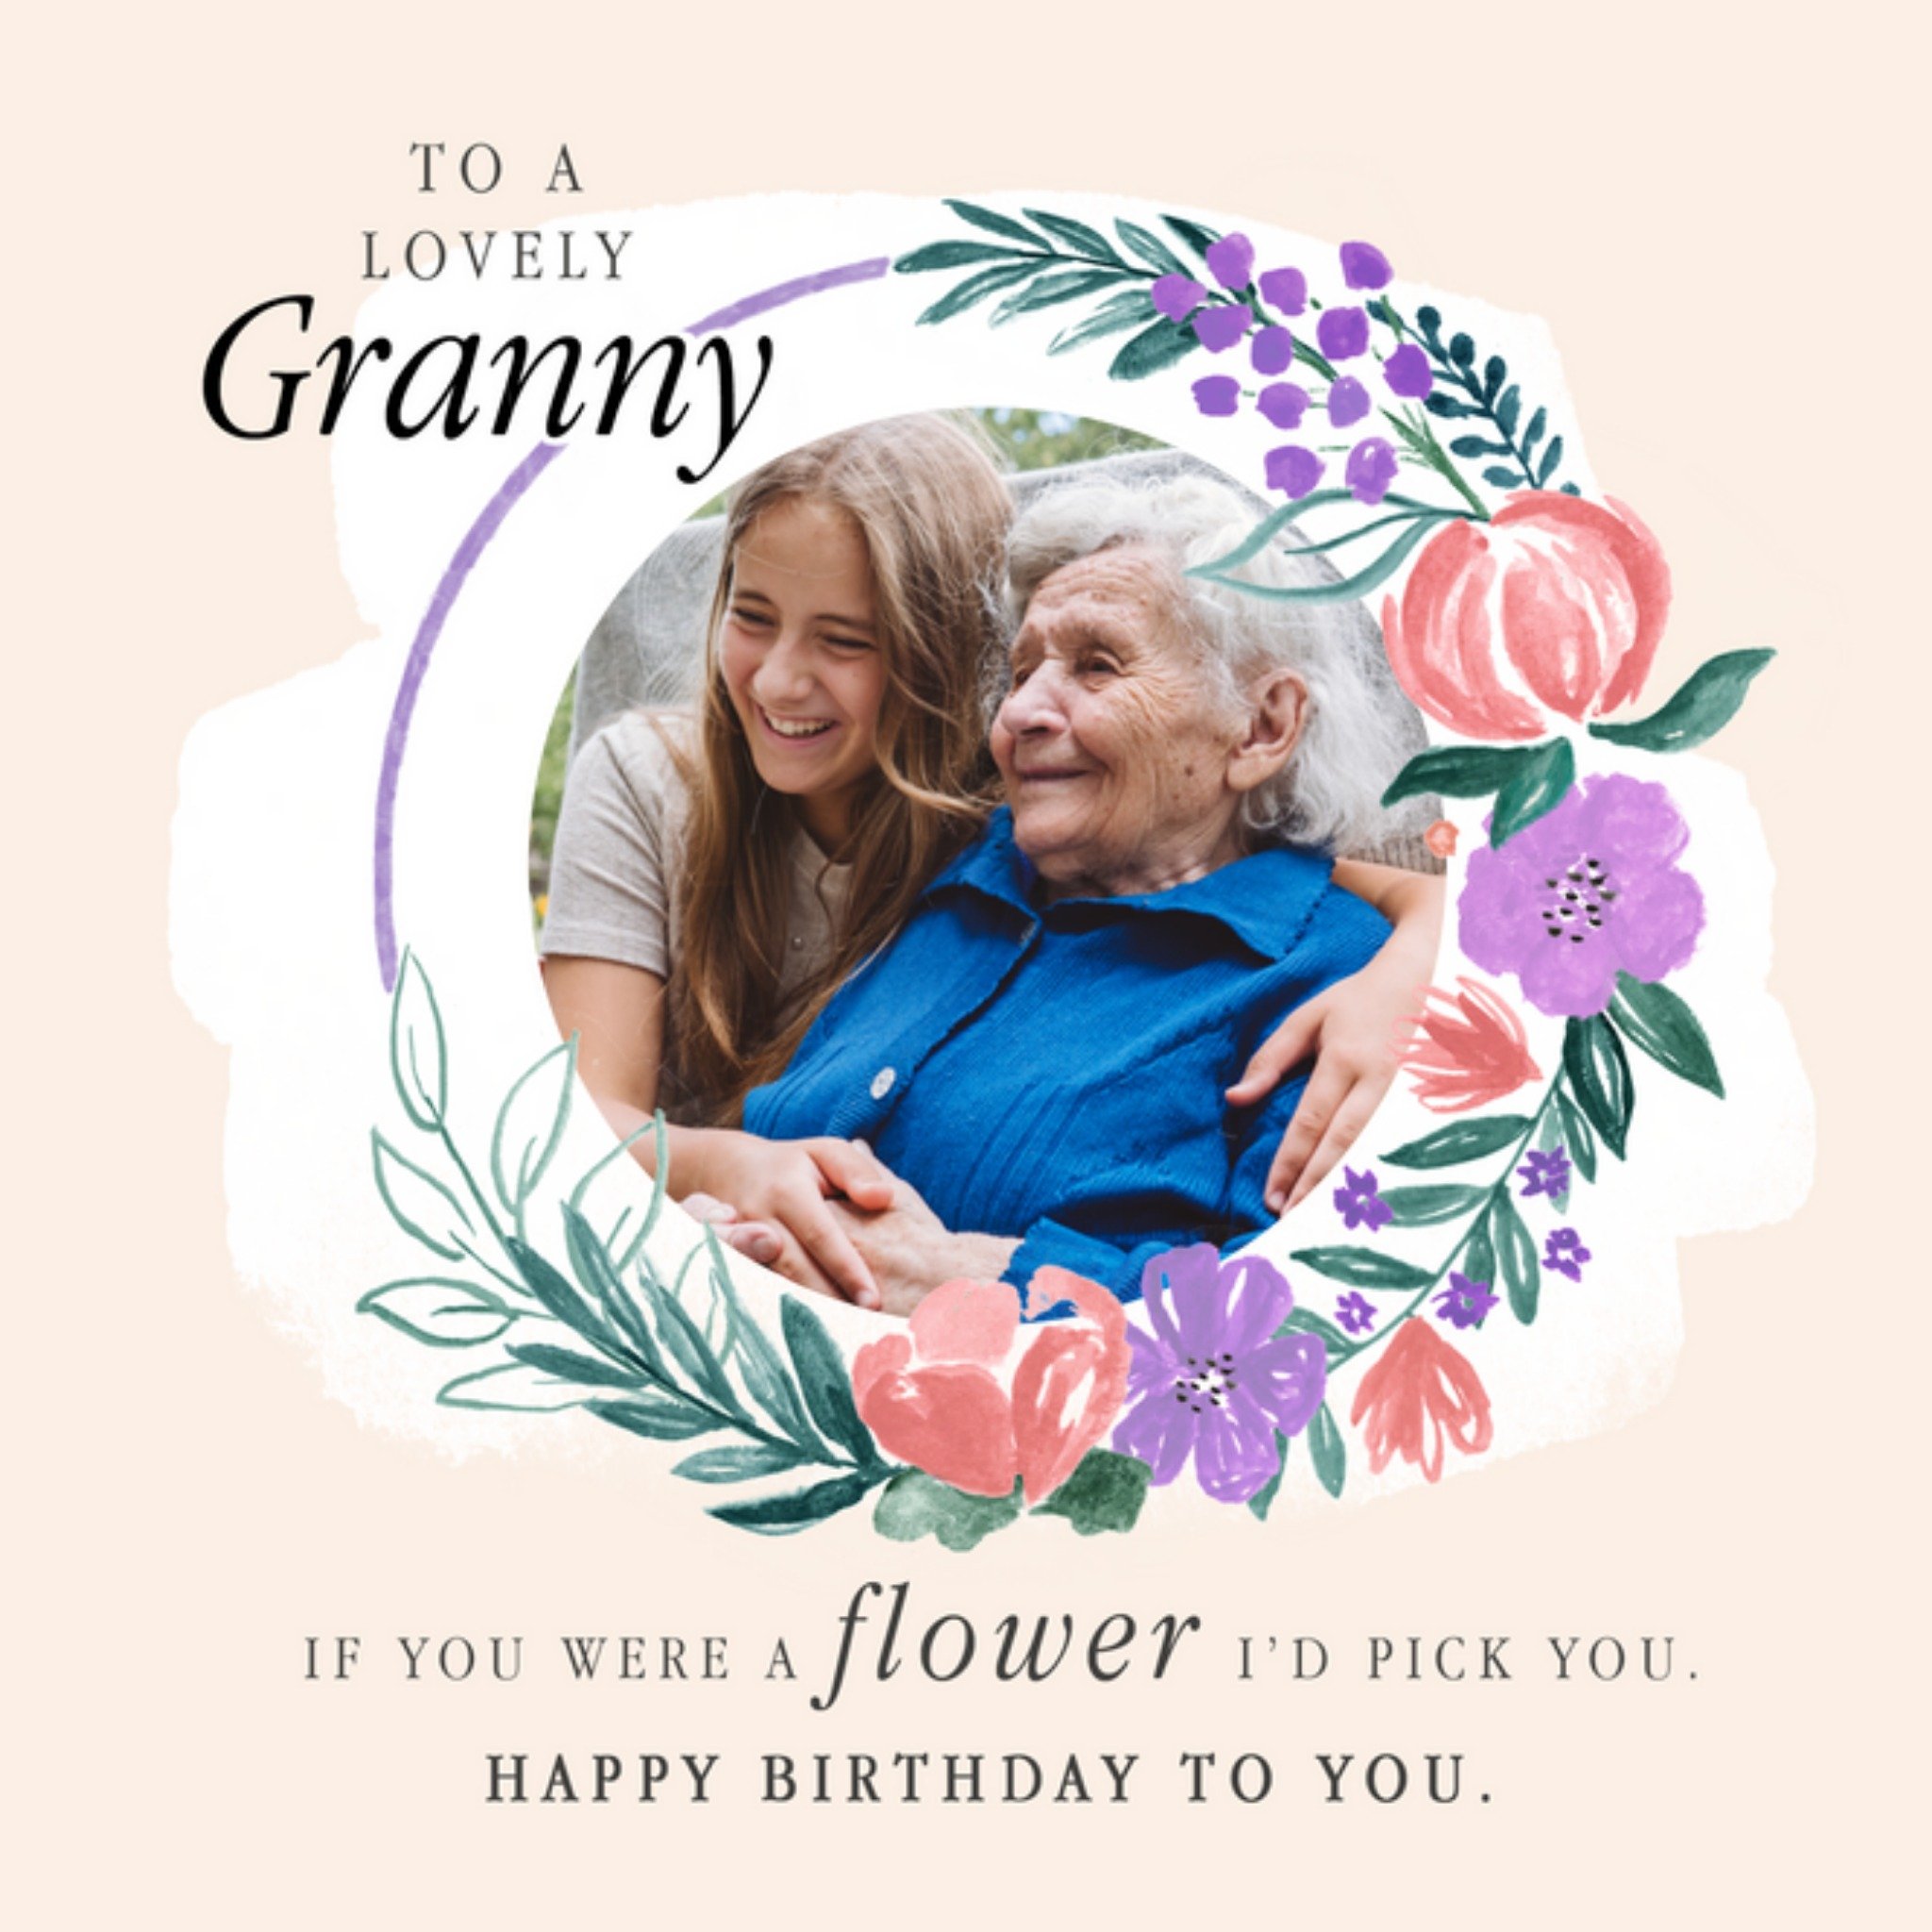 Moonpig To A Lovely Granny Photo Upload Birthday Card, Large